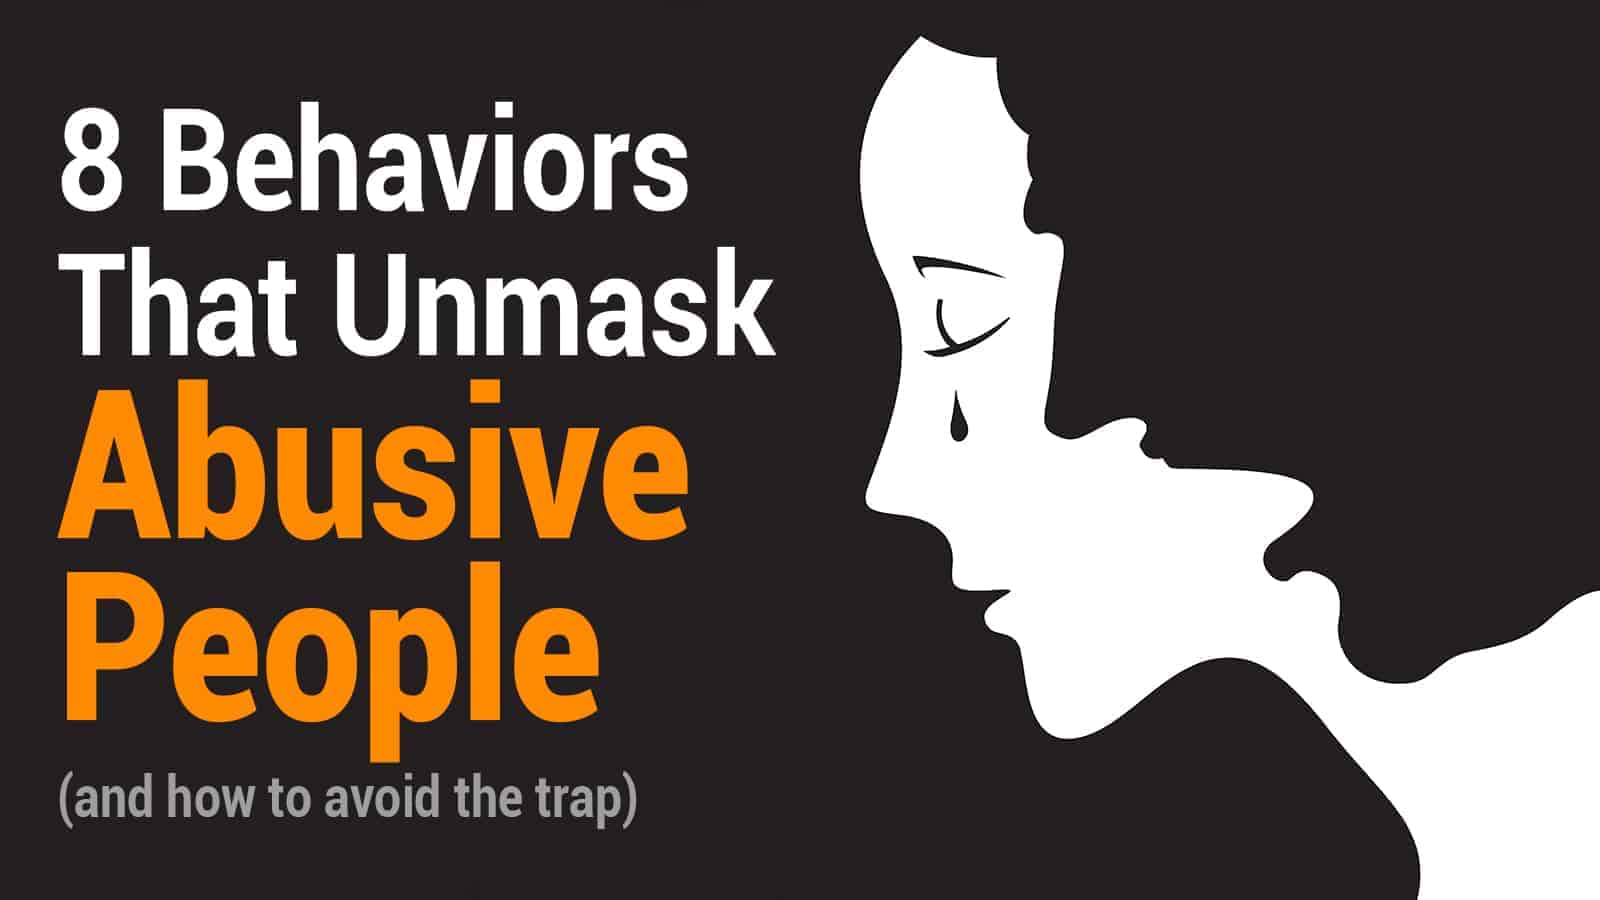 8 Behaviors That Unmask Abusive People (and how to avoid the trap)